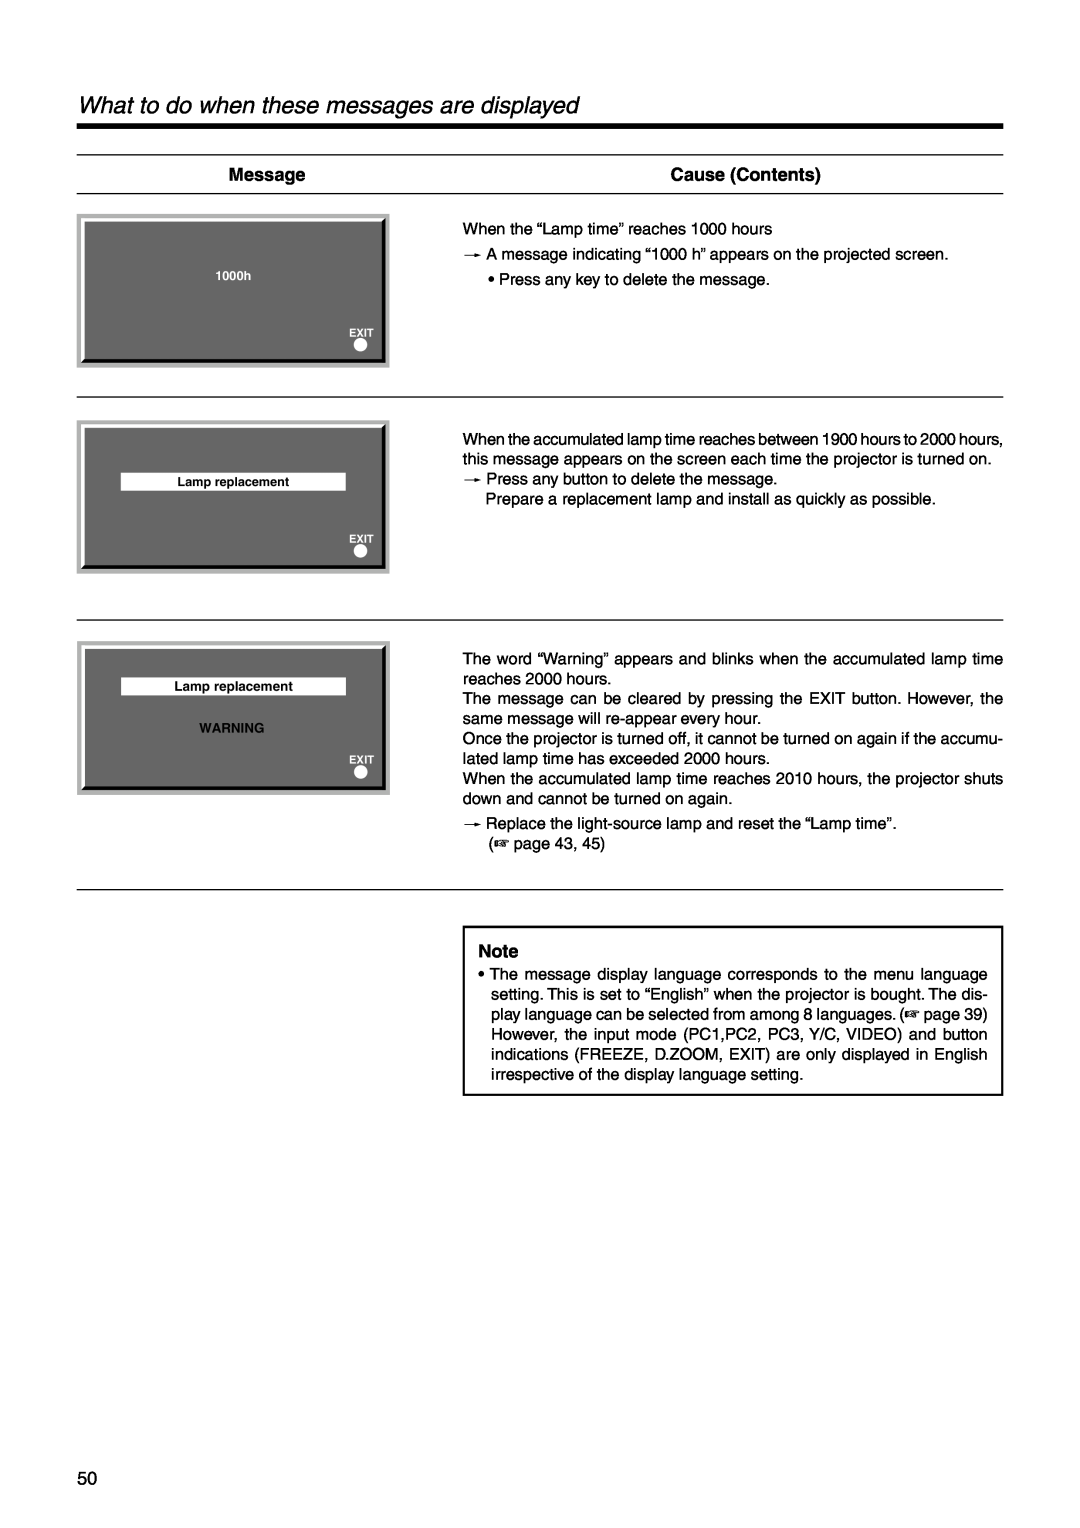 Dukane 28A9017 user manual What to do when these messages are displayed, Message, Cause Contents 